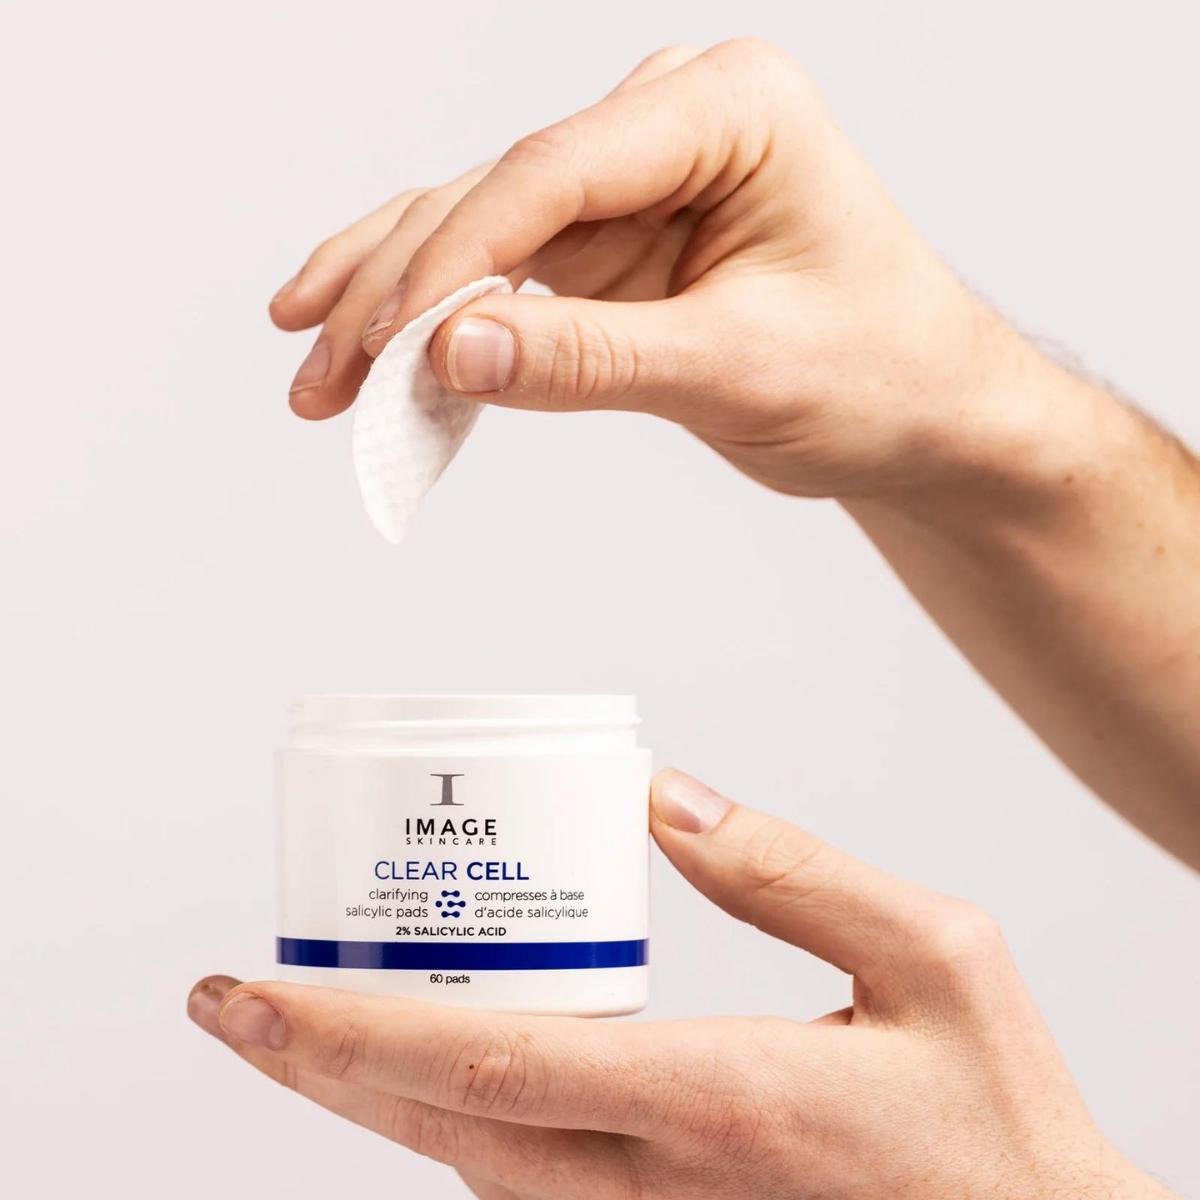 IMAGE Skincare Clear Cell Clarifying Pads picking up 